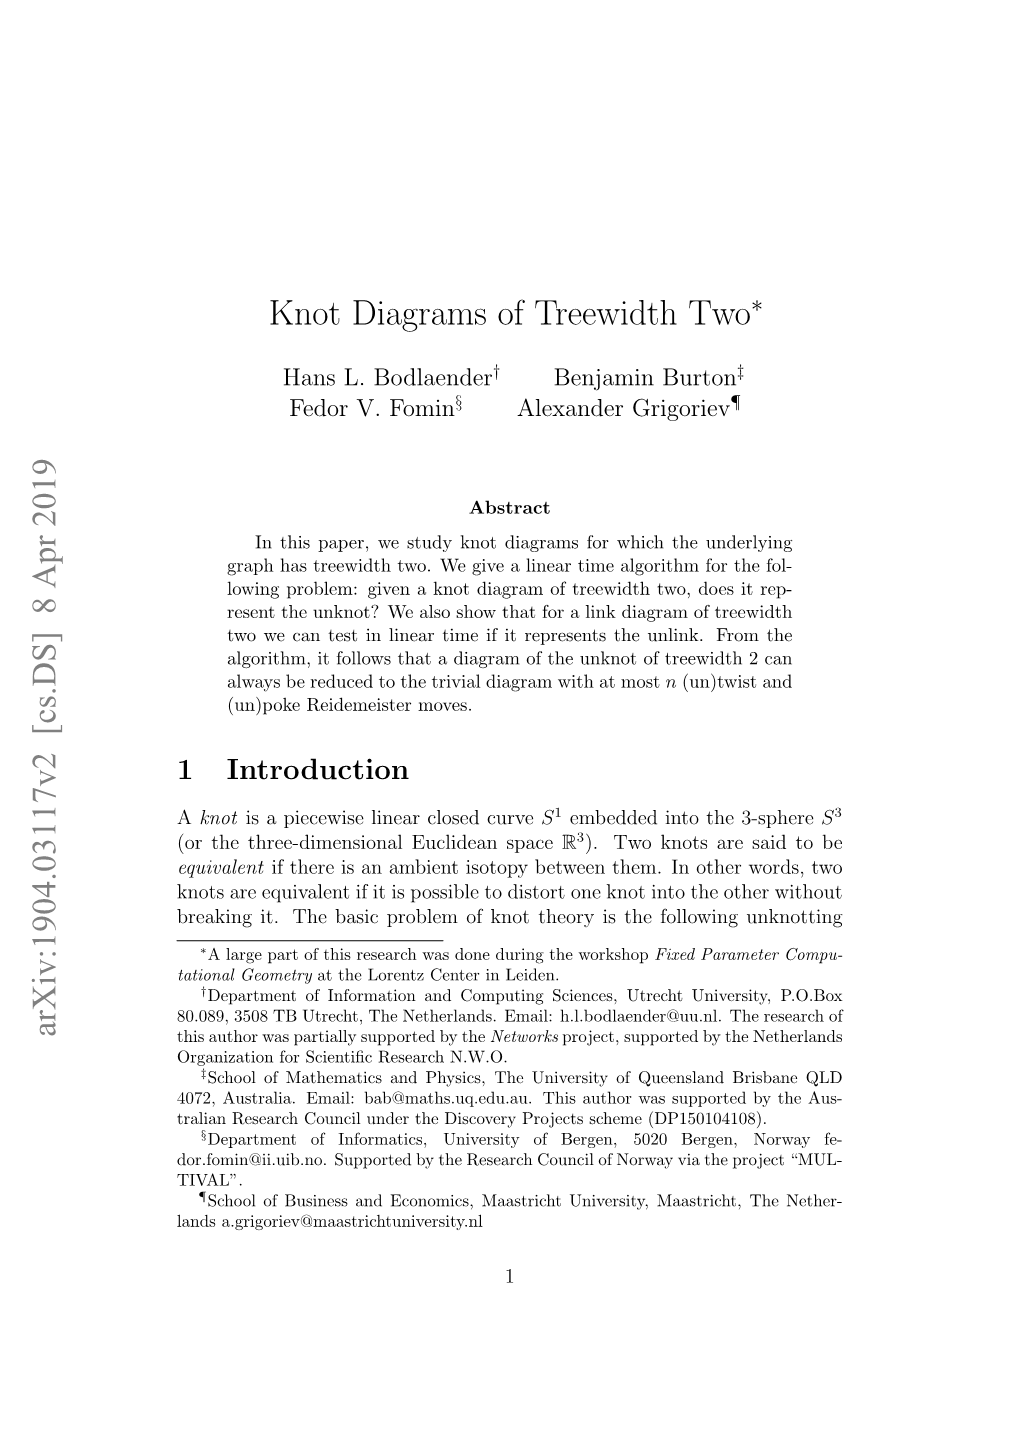 Knot Diagrams of Treewidth Two∗ Arxiv:1904.03117V2 [Cs.DS]